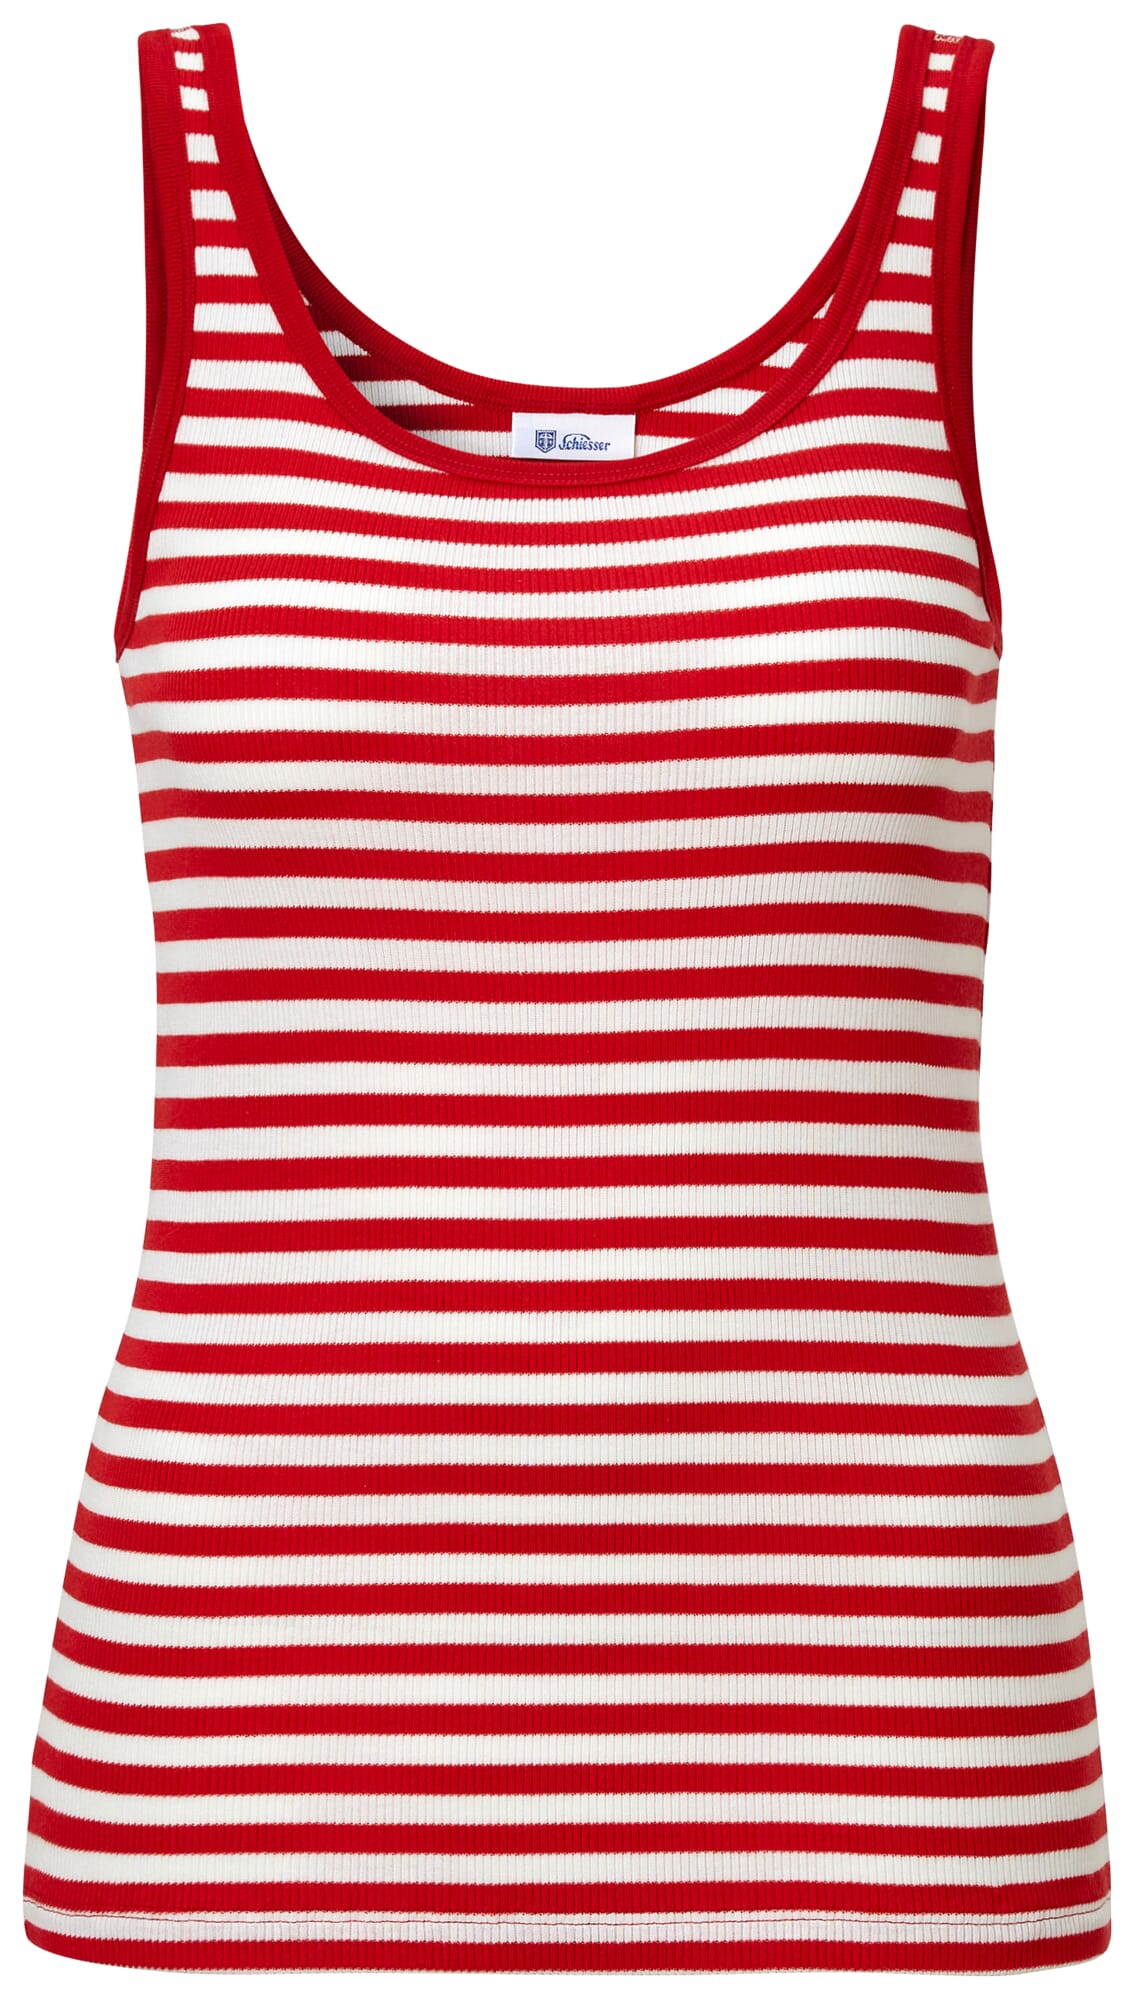 Ladies tank top curled, Red-White